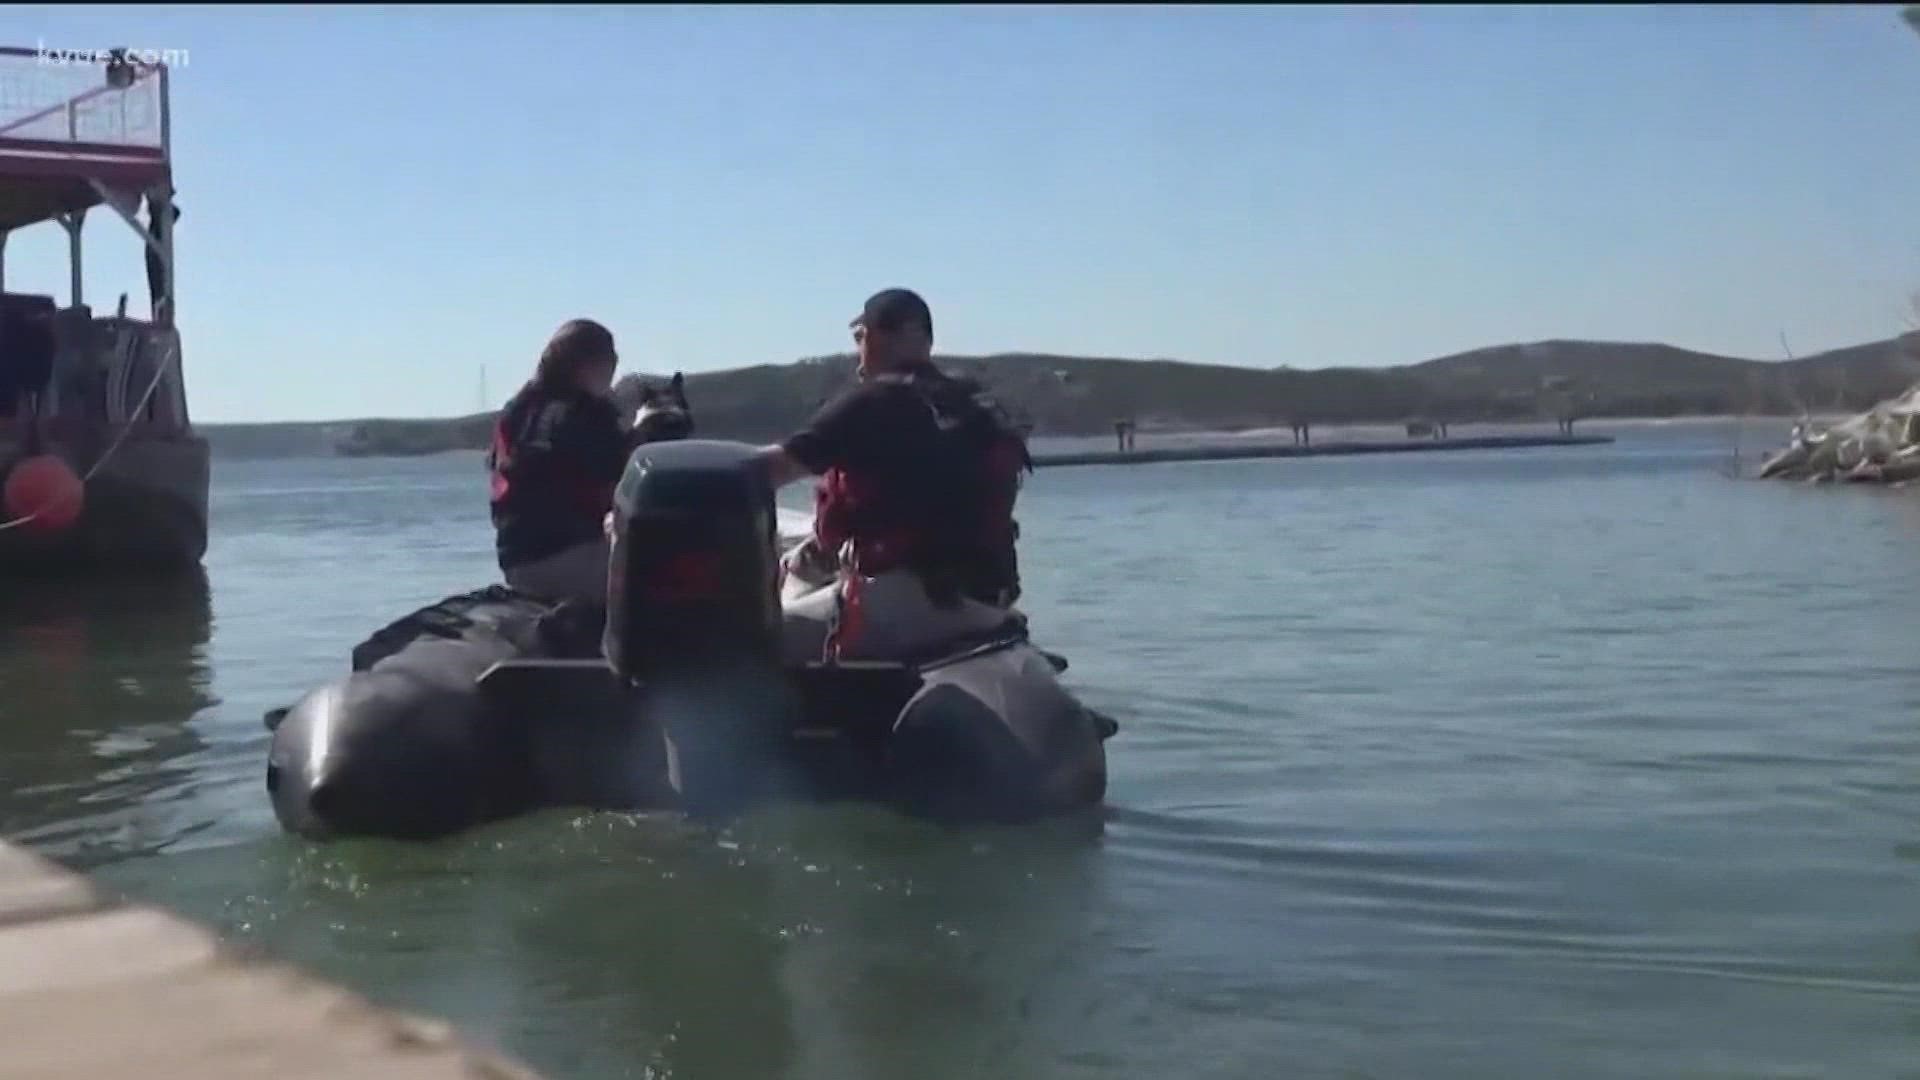 Several people are being charged with evidence-tampering and alcohol-related offenses in connection with the death of a 19-year-old on Lake Travis in 2019.